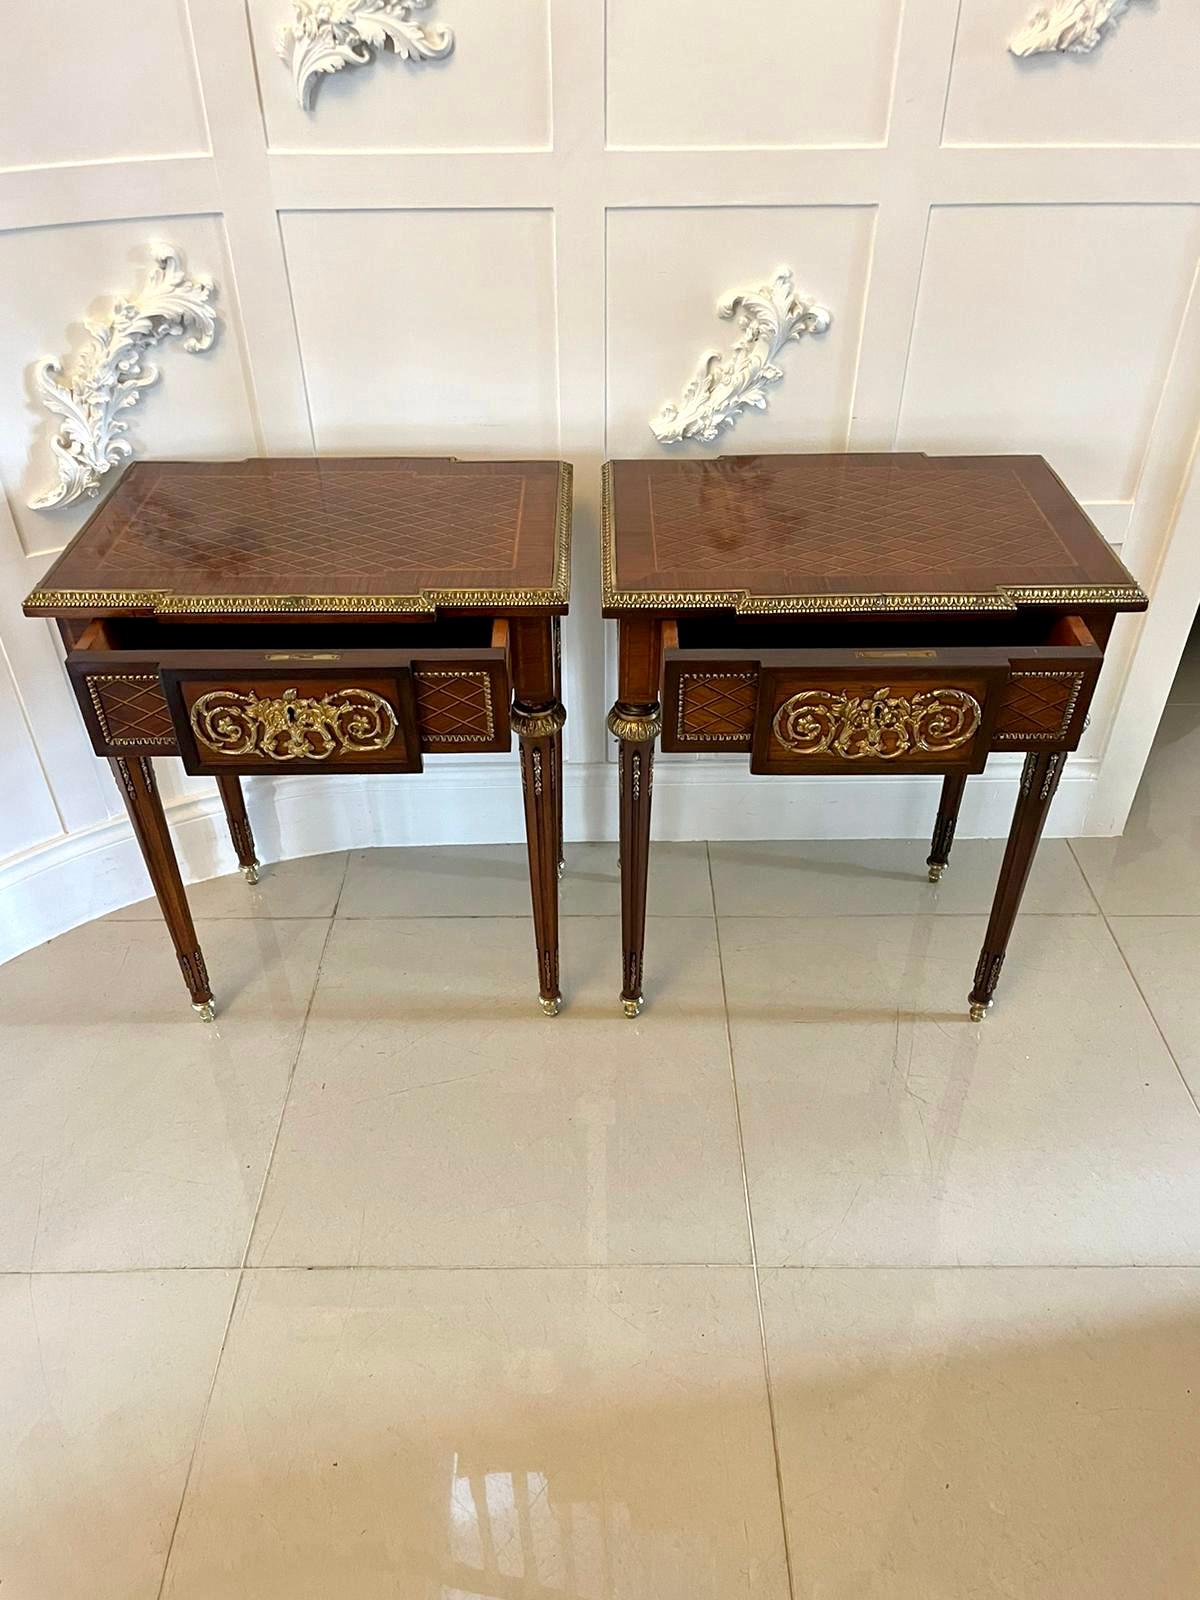 Early 20th Century Pair of Quality Antique French Kingwood Freestanding Lamp or Bedside Tables